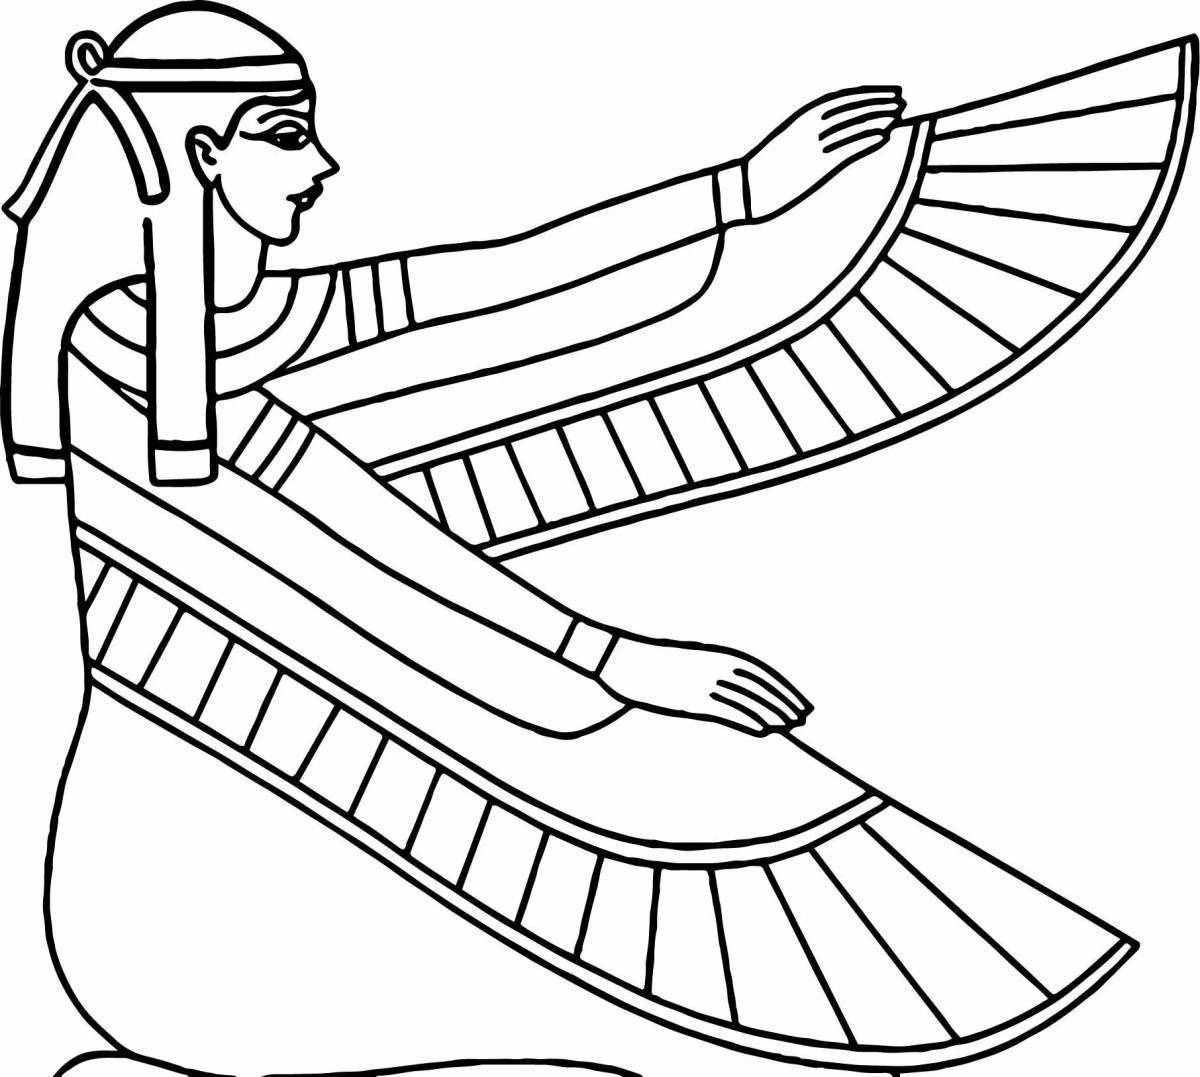 Inspirational ancient egypt coloring book for kids